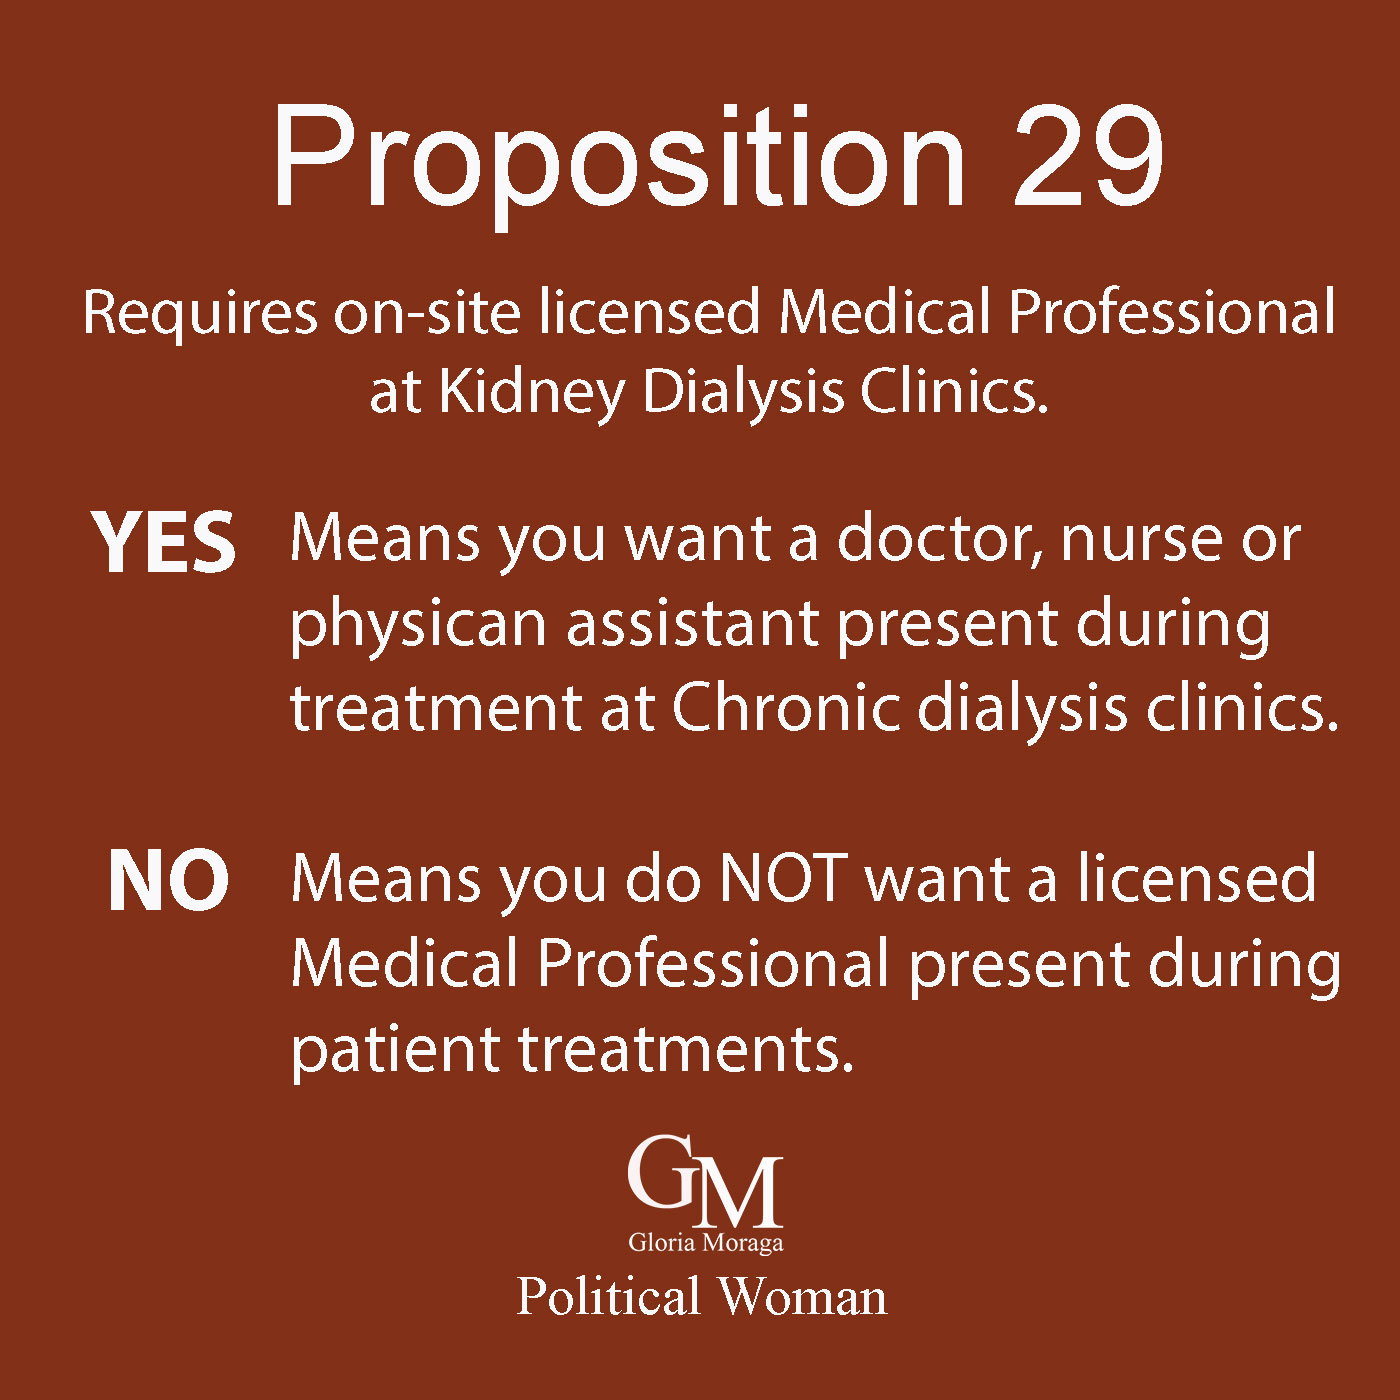 Prop. 29 Kidney Dialysis Clinics and On-Site Doctors